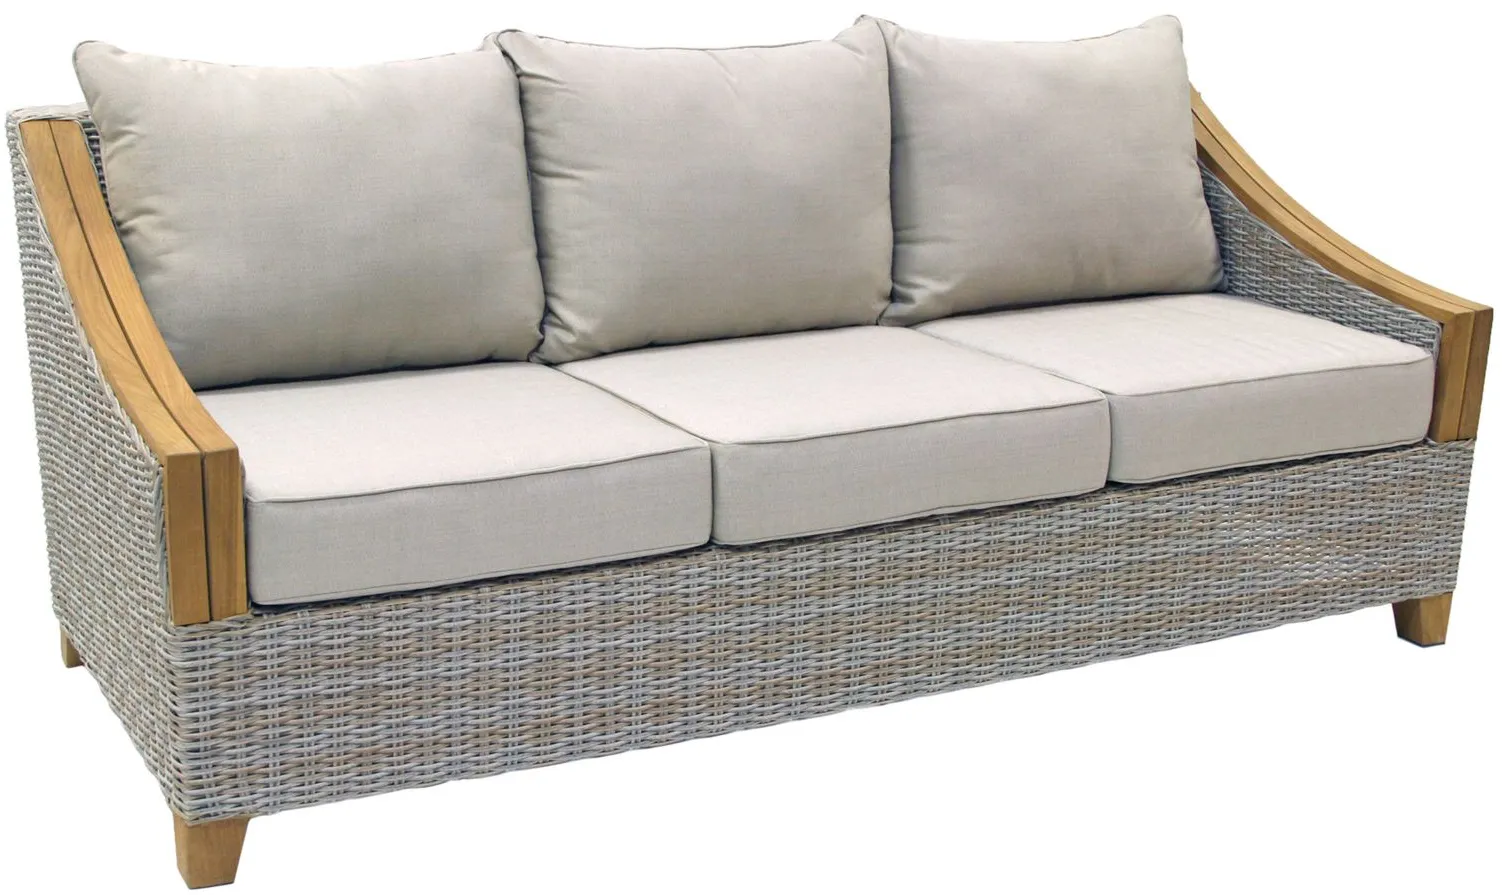 Sea Drift Wicker and Teak Outdoor Sofa in Ash Gray by Outdoor Interiors